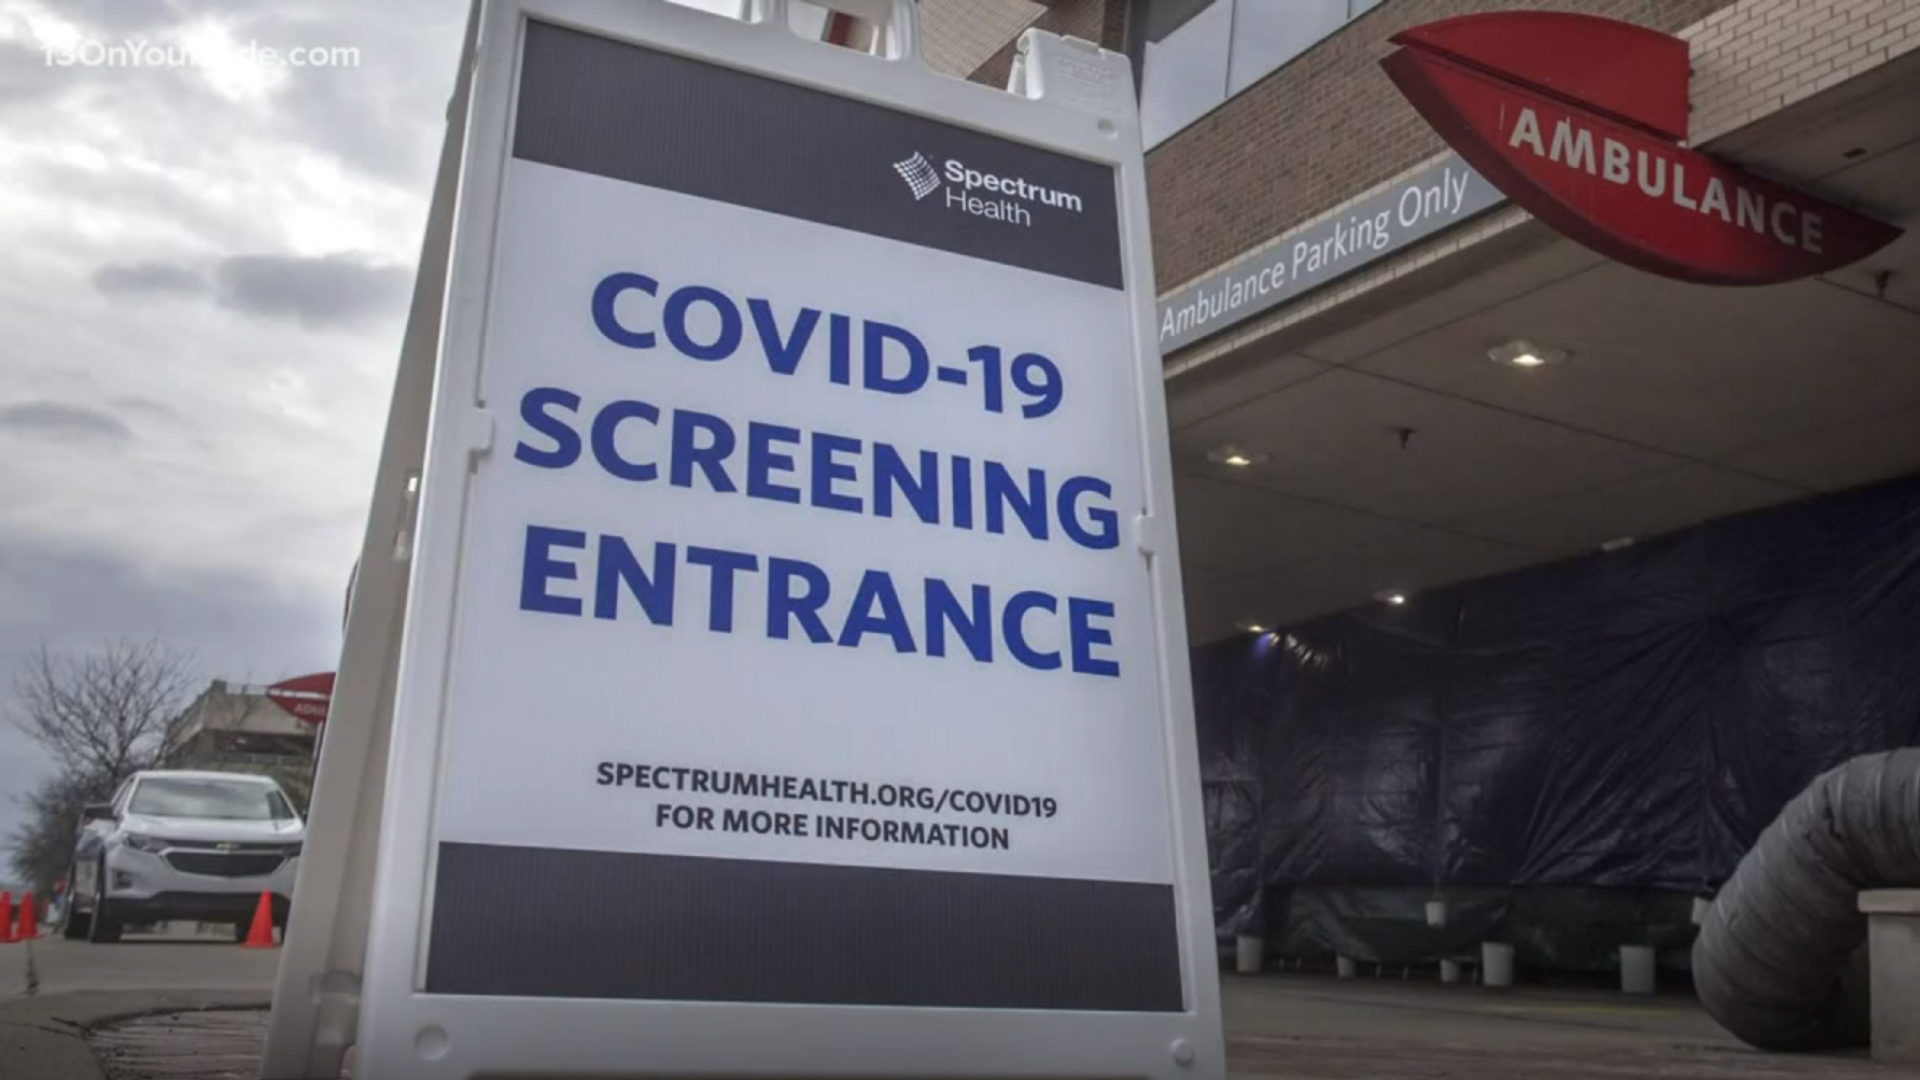 Spectrum Health targets communities where COVID-19 information is especially needed